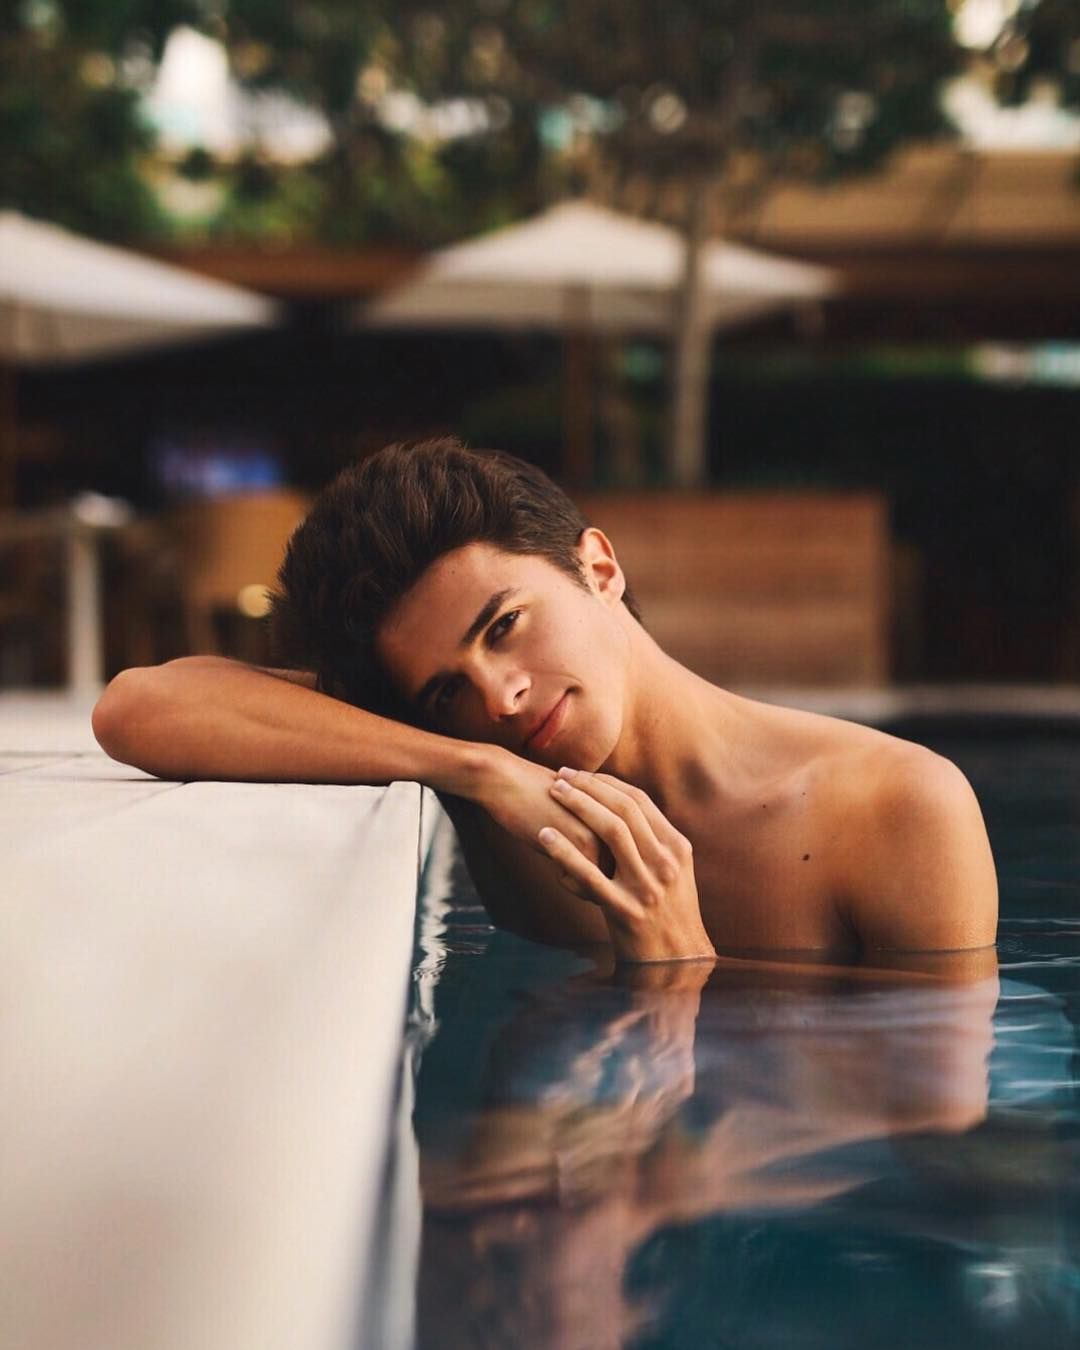 Brent Rivera the youtuber